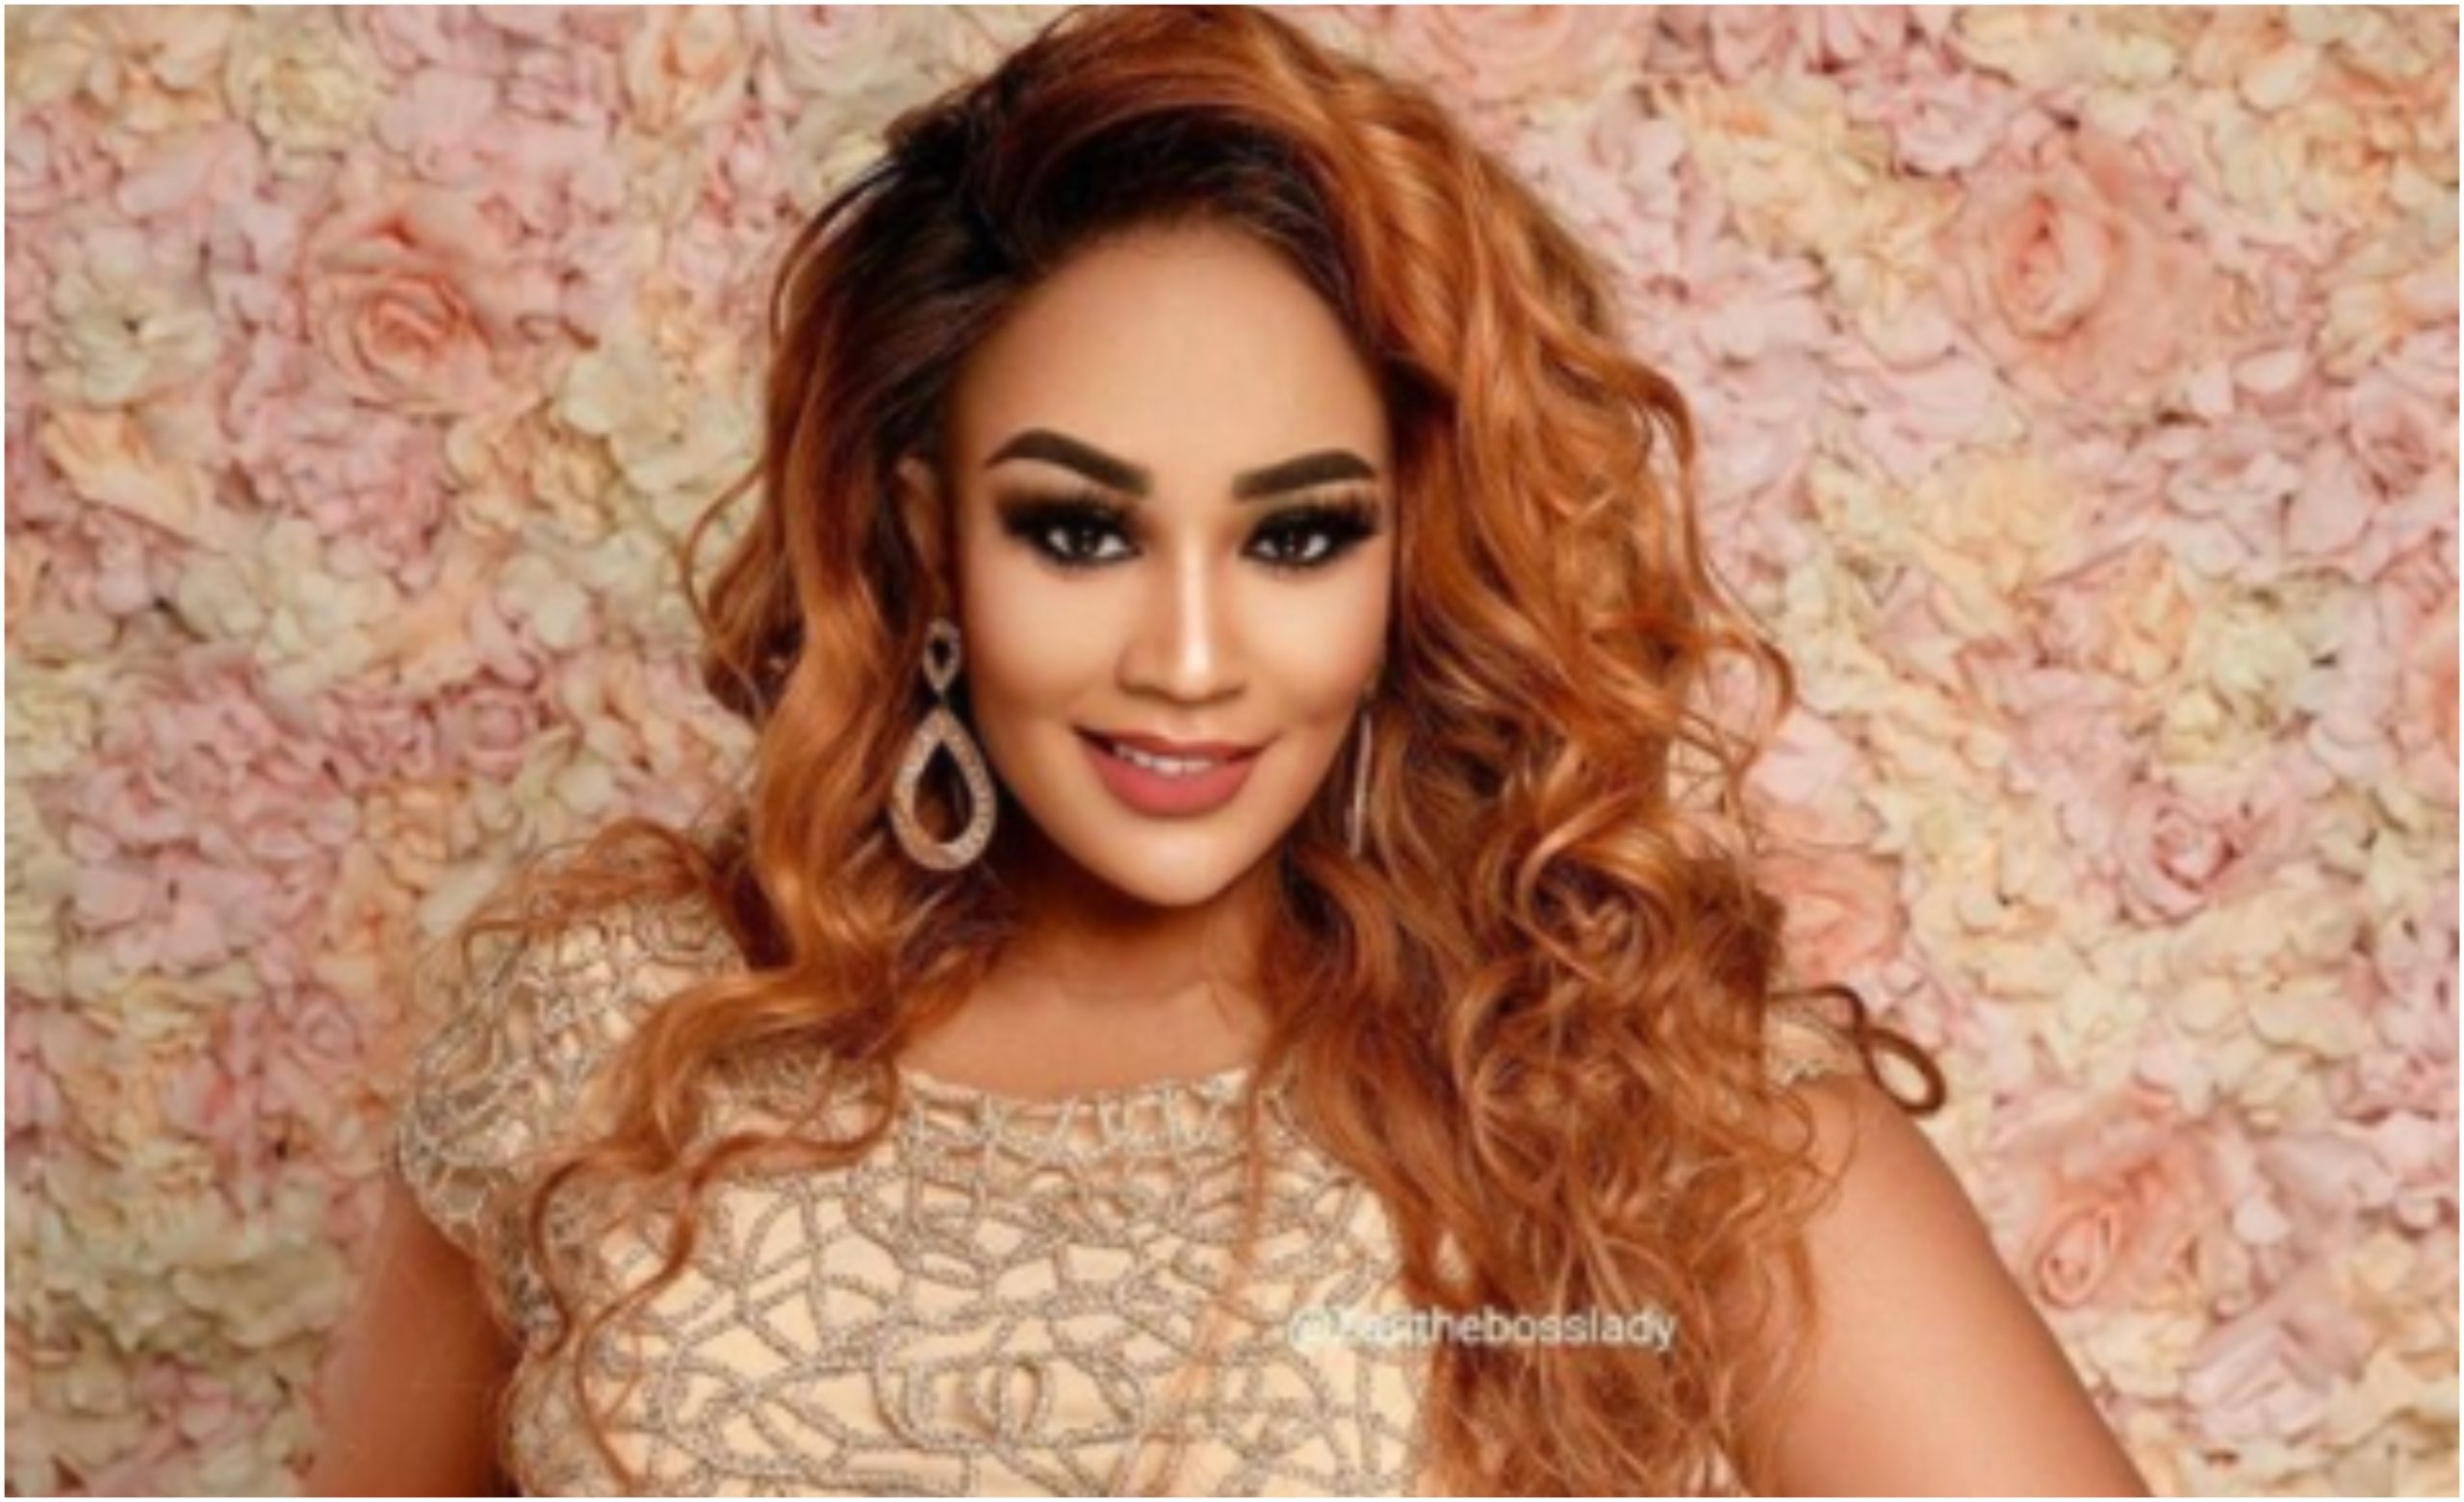 Zari is barking up the wrong tree as pertains to her son being gay